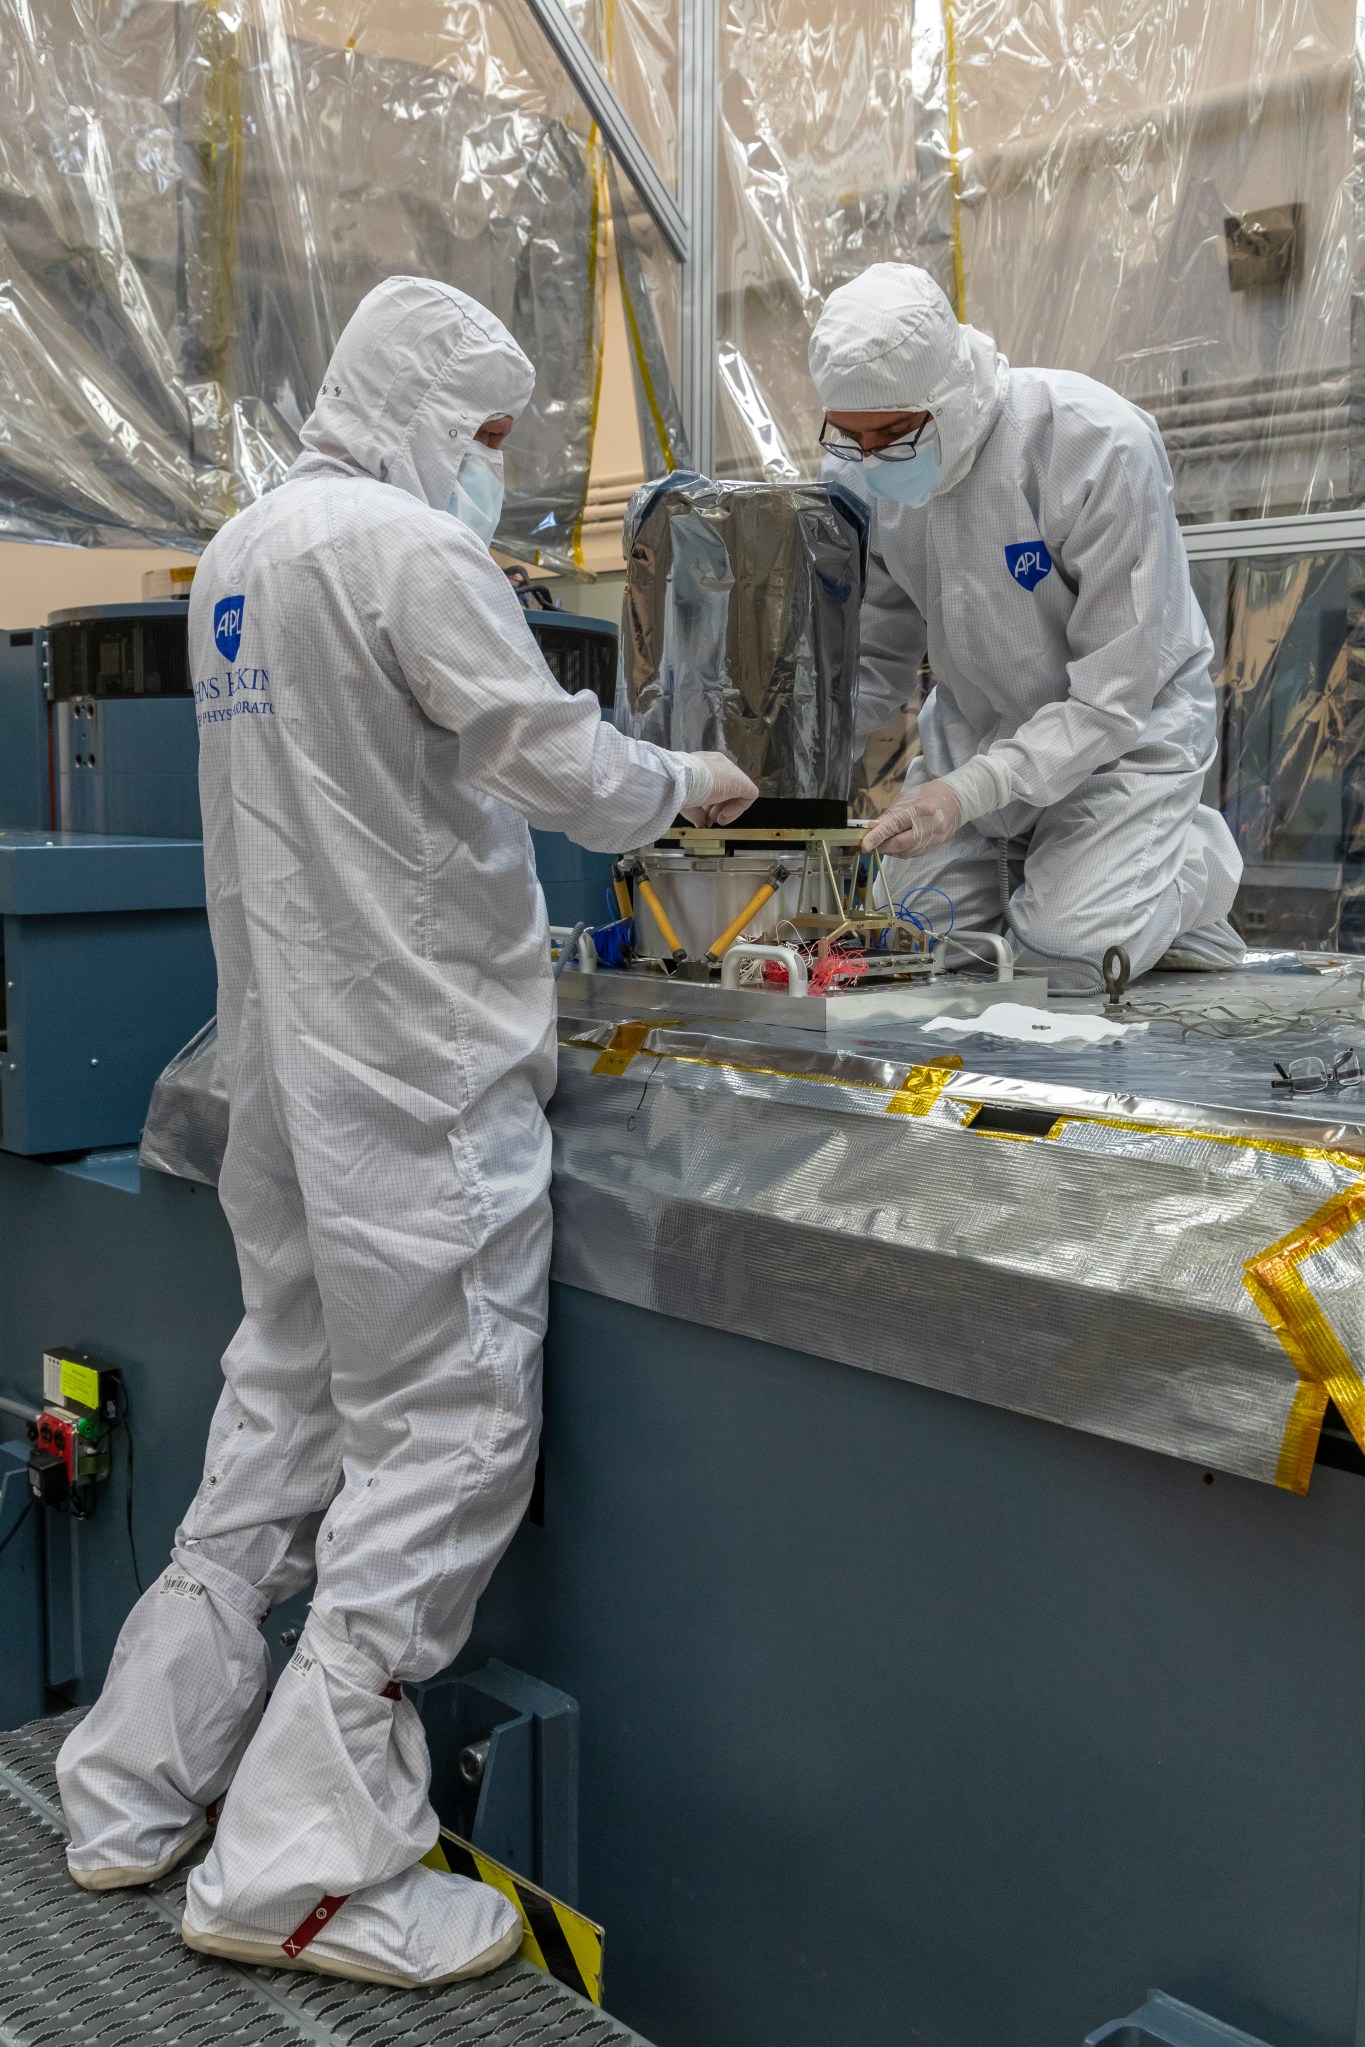 two people in protective suits work on a foil-covered instrument box